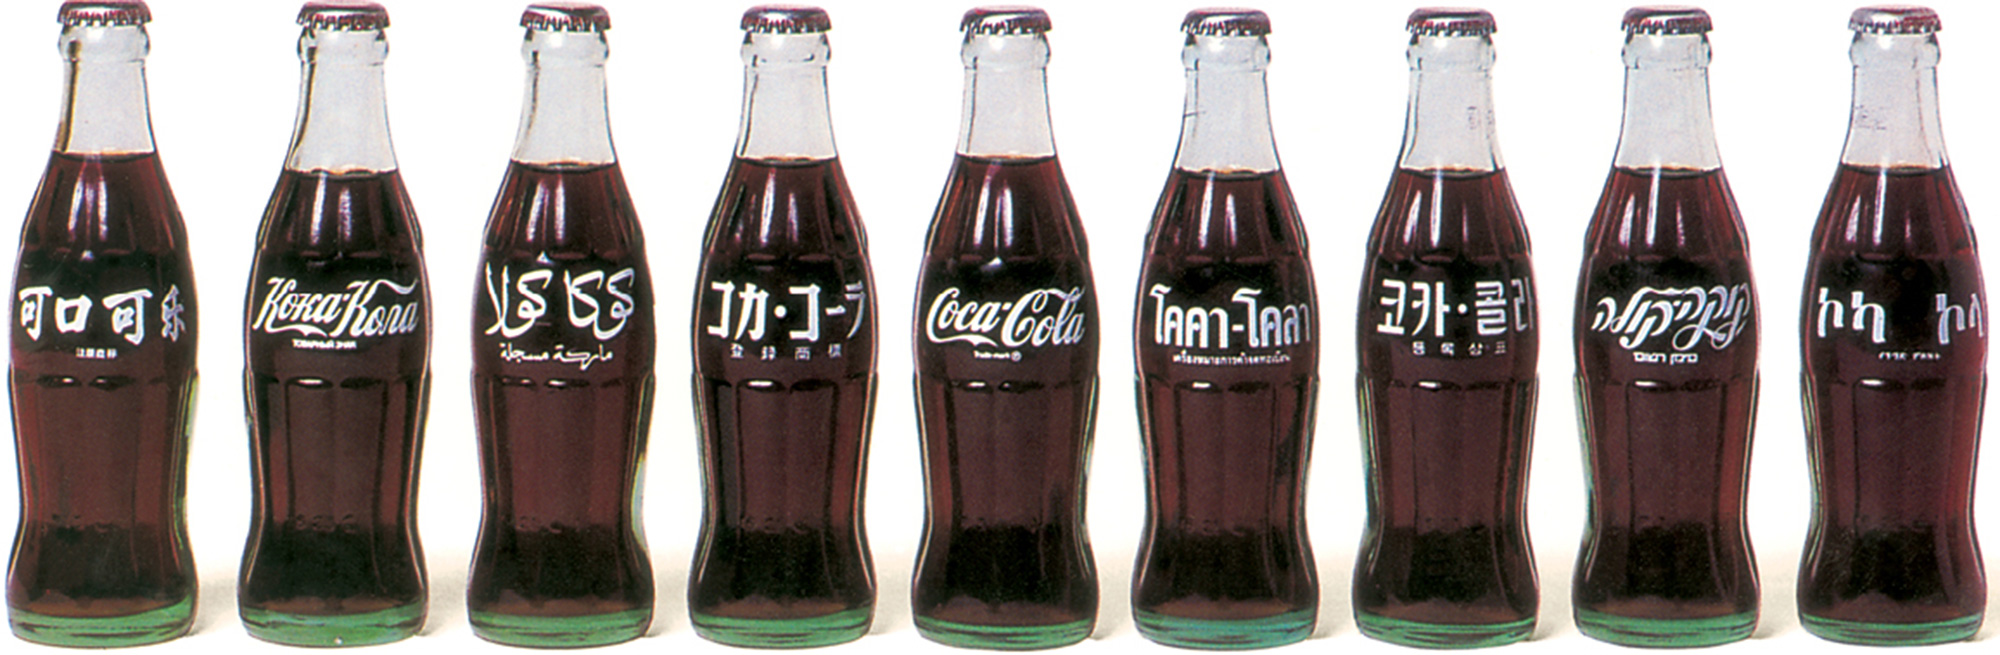 Hobbleskirt bottles, 1986. From left to right: China, Bulgaria, Morocco, Japan, United States, Thailand, Korea, Israel, and Ethiopia.